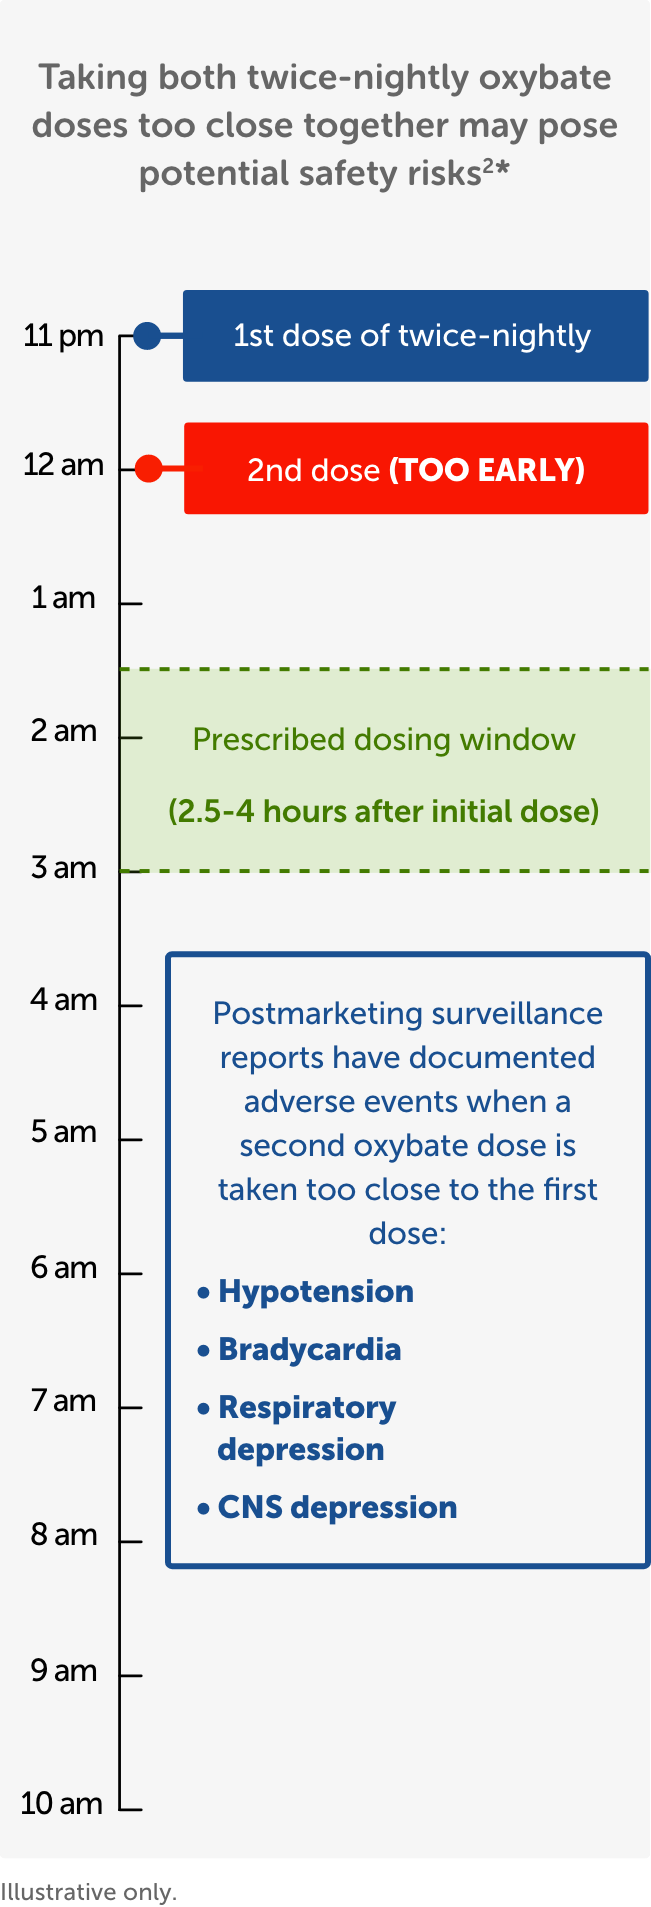 Timeline depicting postmarketing surveillance reports that have documented adverse events when patients take their second oxybate dose too early, including hypotension, bradycardia, respiratory depression, and CNS depression